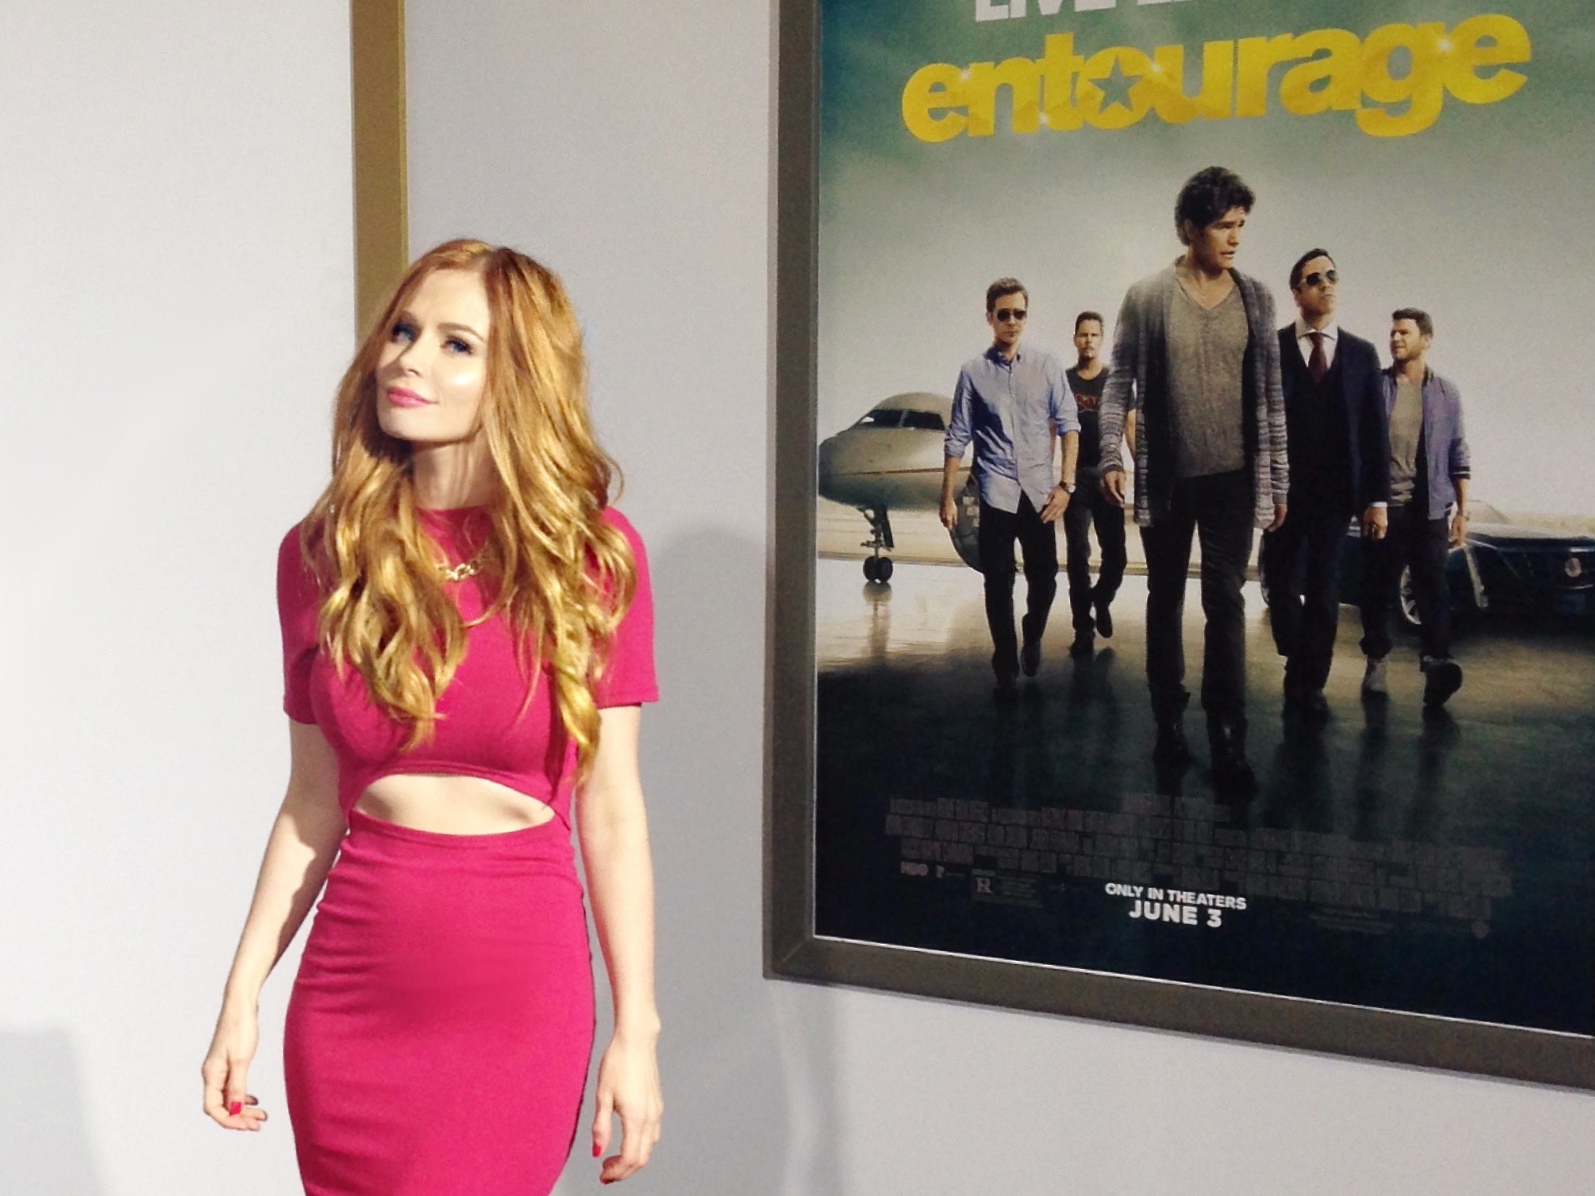 Hannah Griffith at the Los Angeles premiere of 'Entourage' at Regency Village Theatre on June 1, 2015 in Westwood, California.